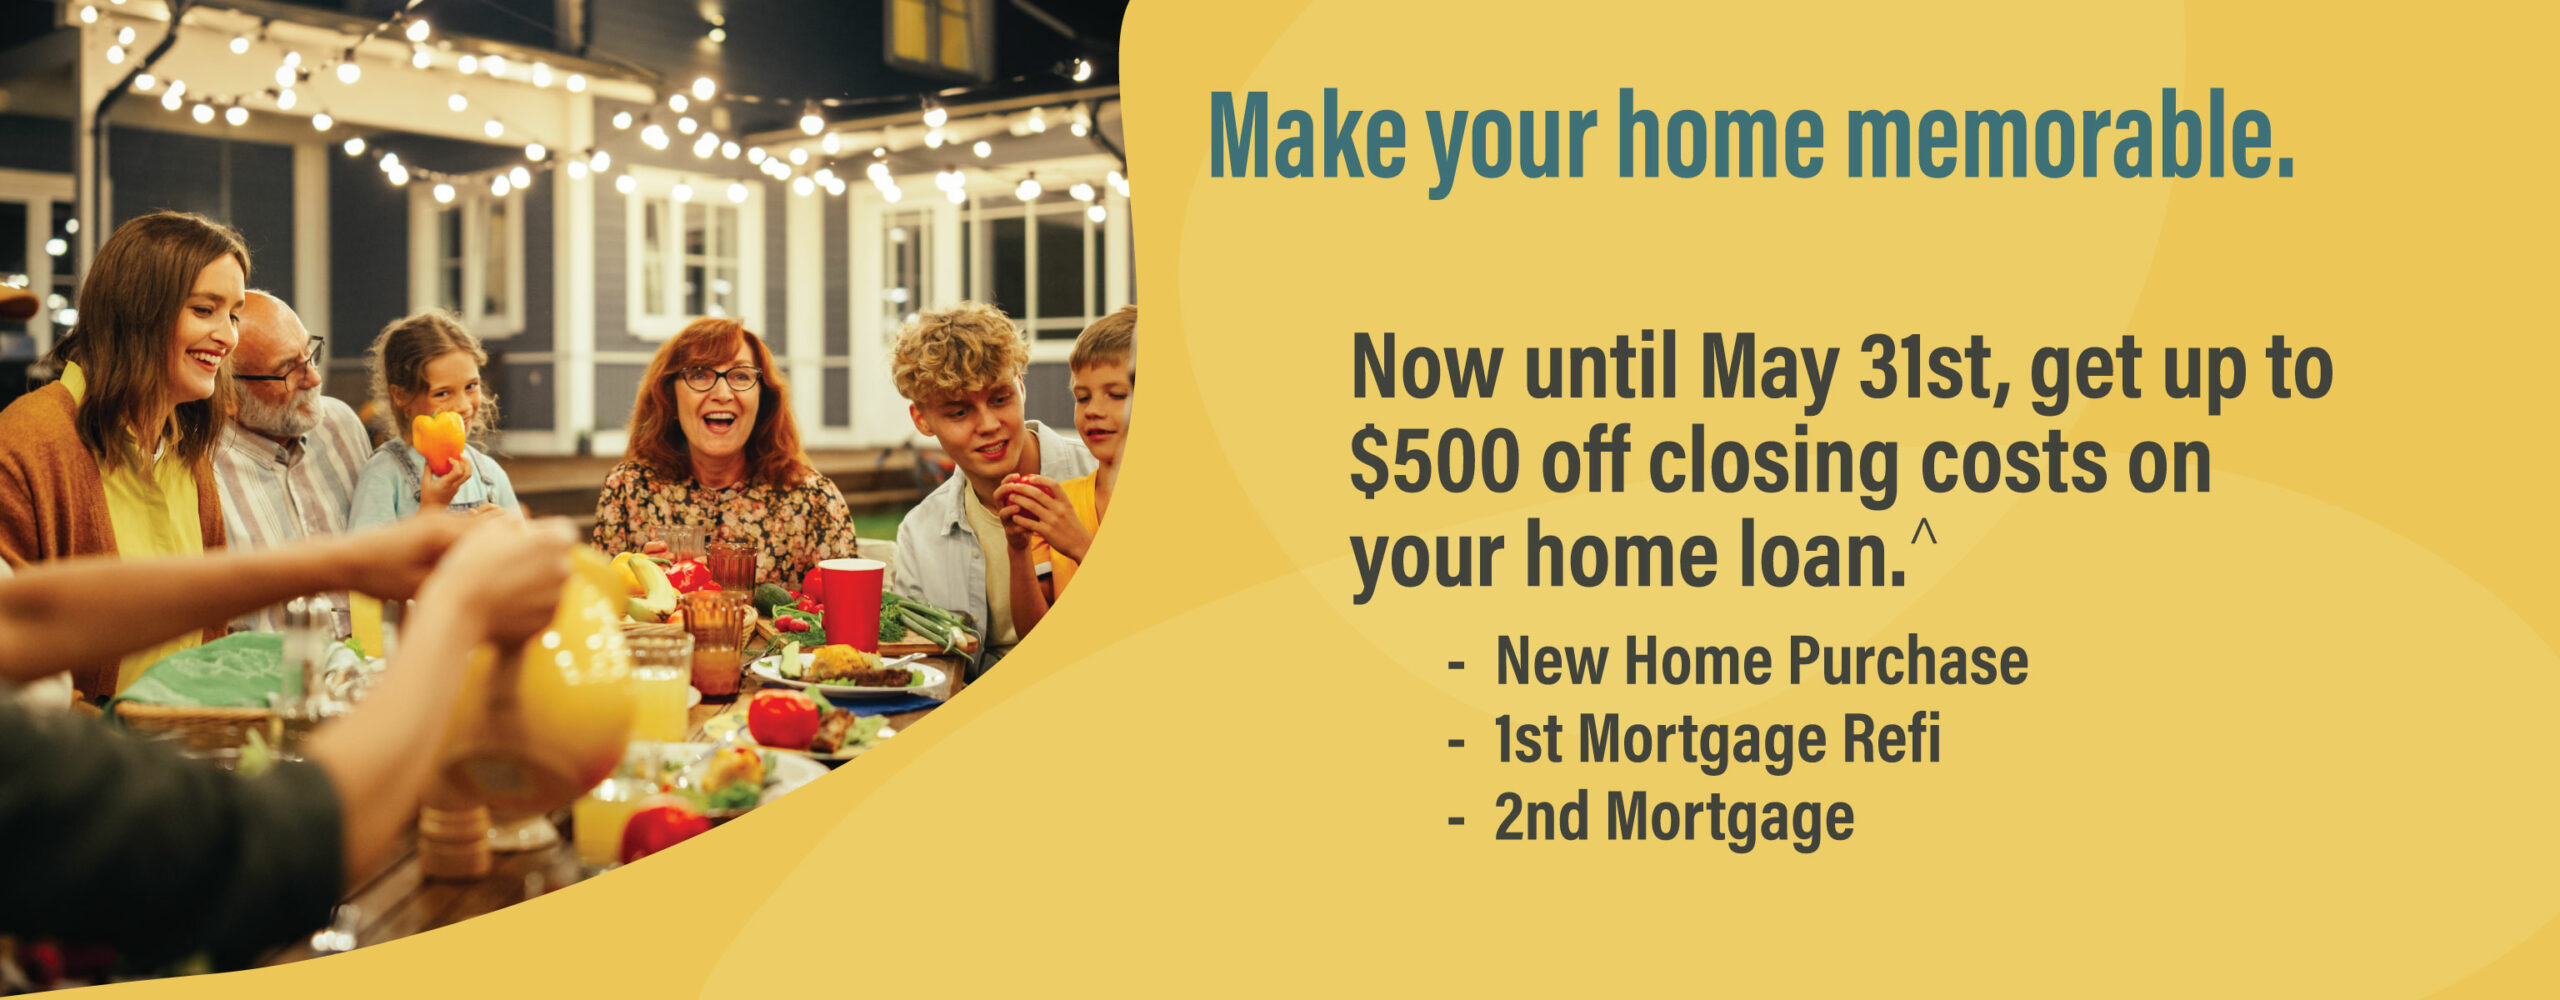 $500 Off Closing cost Offer